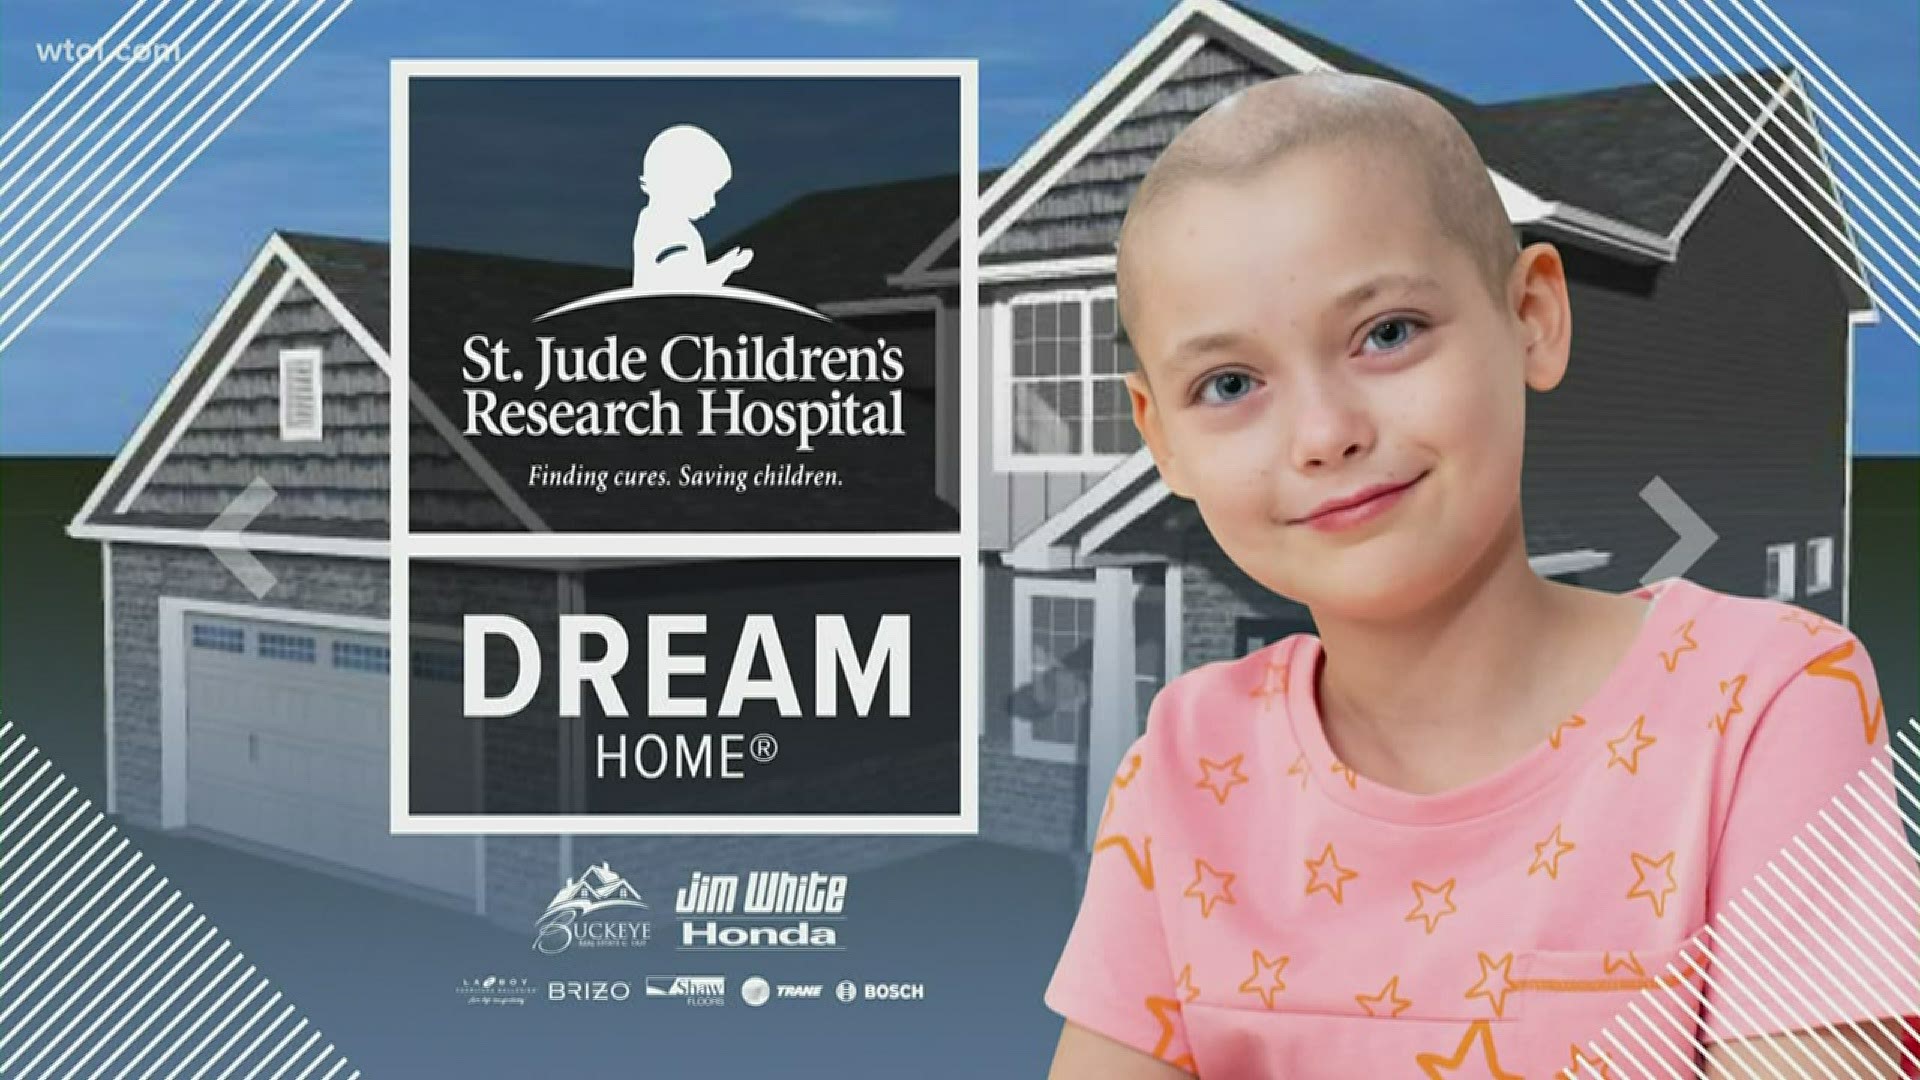 When can I get a St. Jude Dream Home ticket?